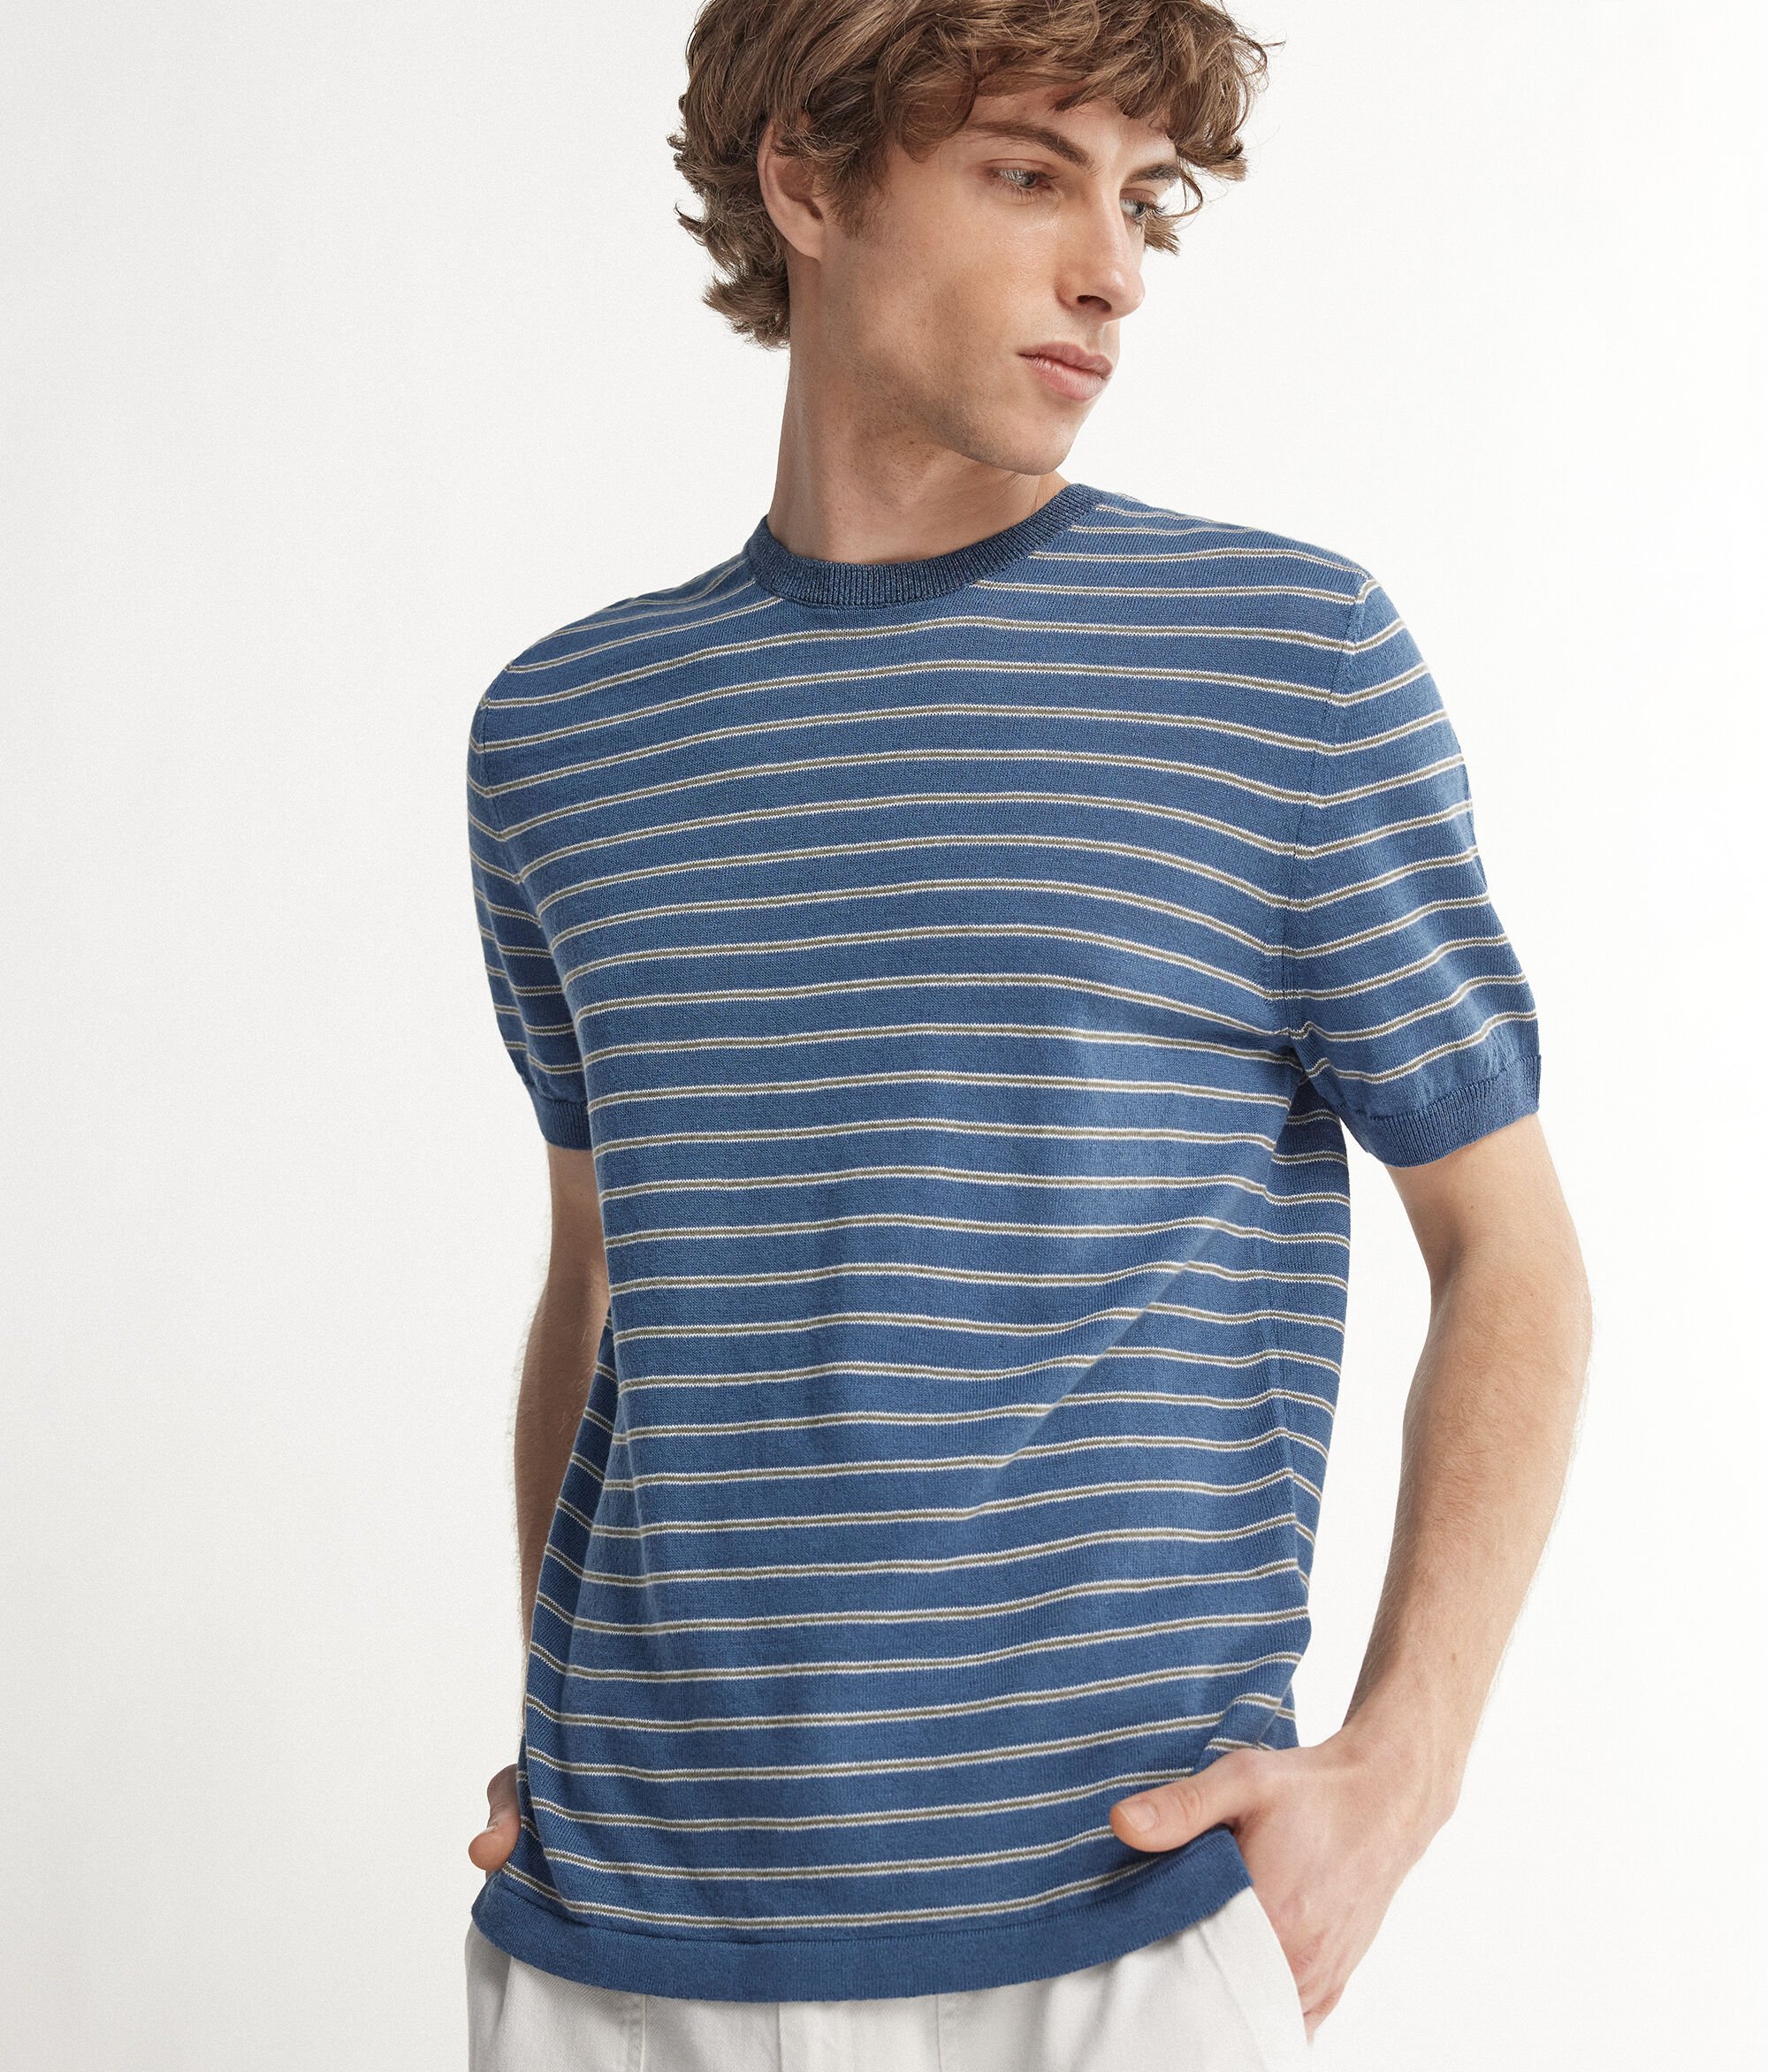 Striped T-Shirt with Short Sleeves